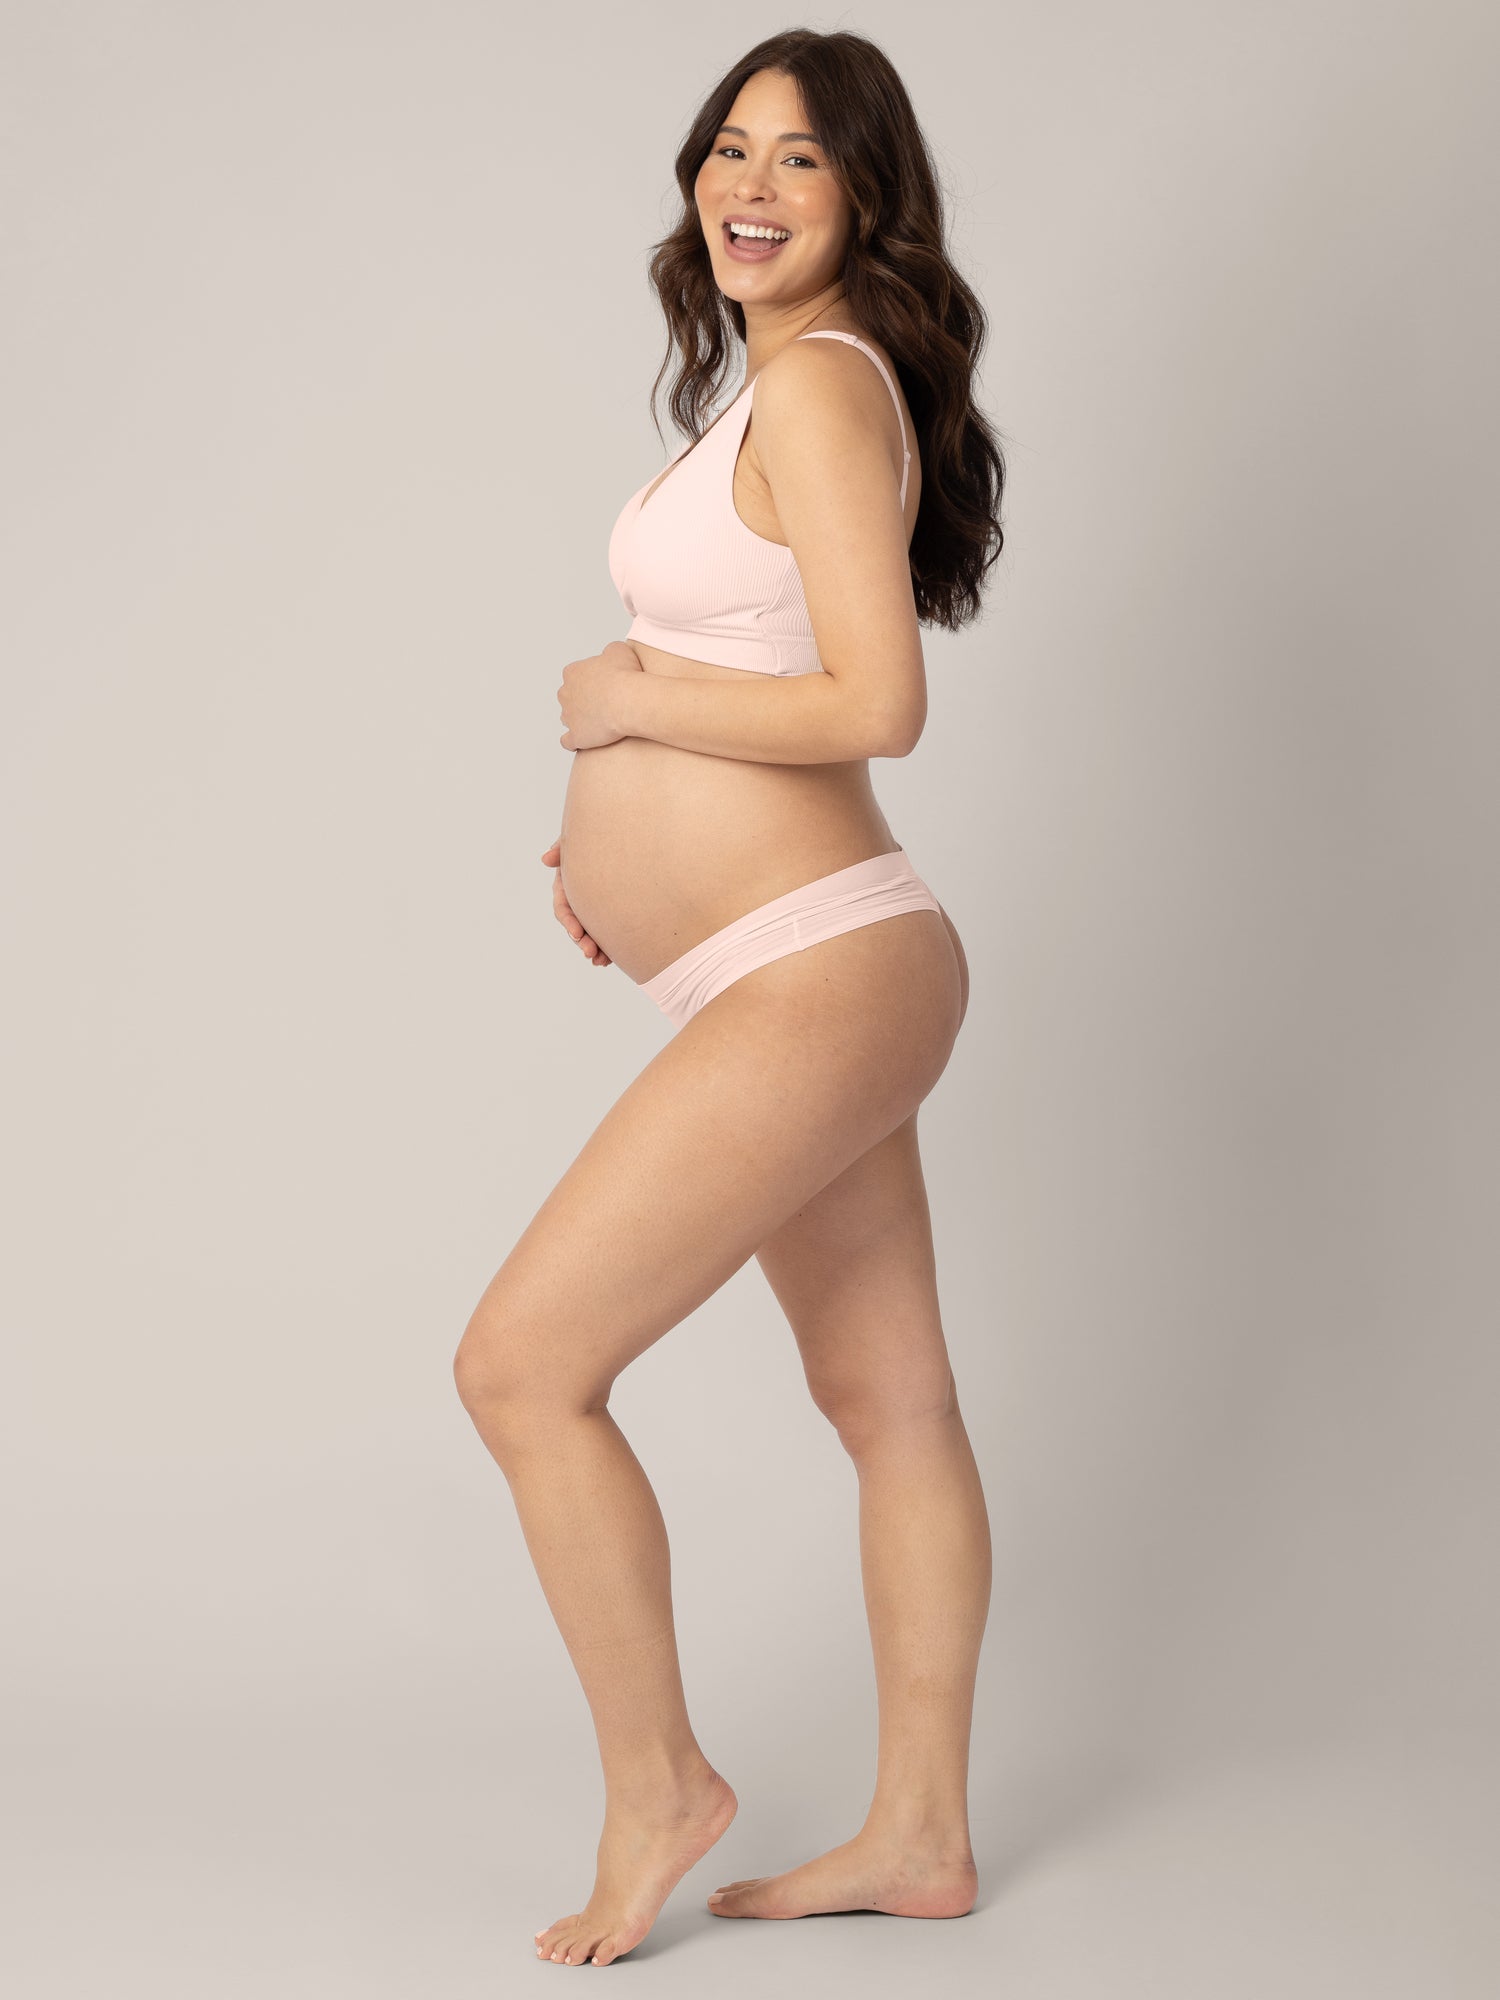 Pregnant model with her hand on her stomach and her other hand at her side smiling at the camera and wearing the Grow with Me™ Maternity & Postpartum Thong in Soft Pink.